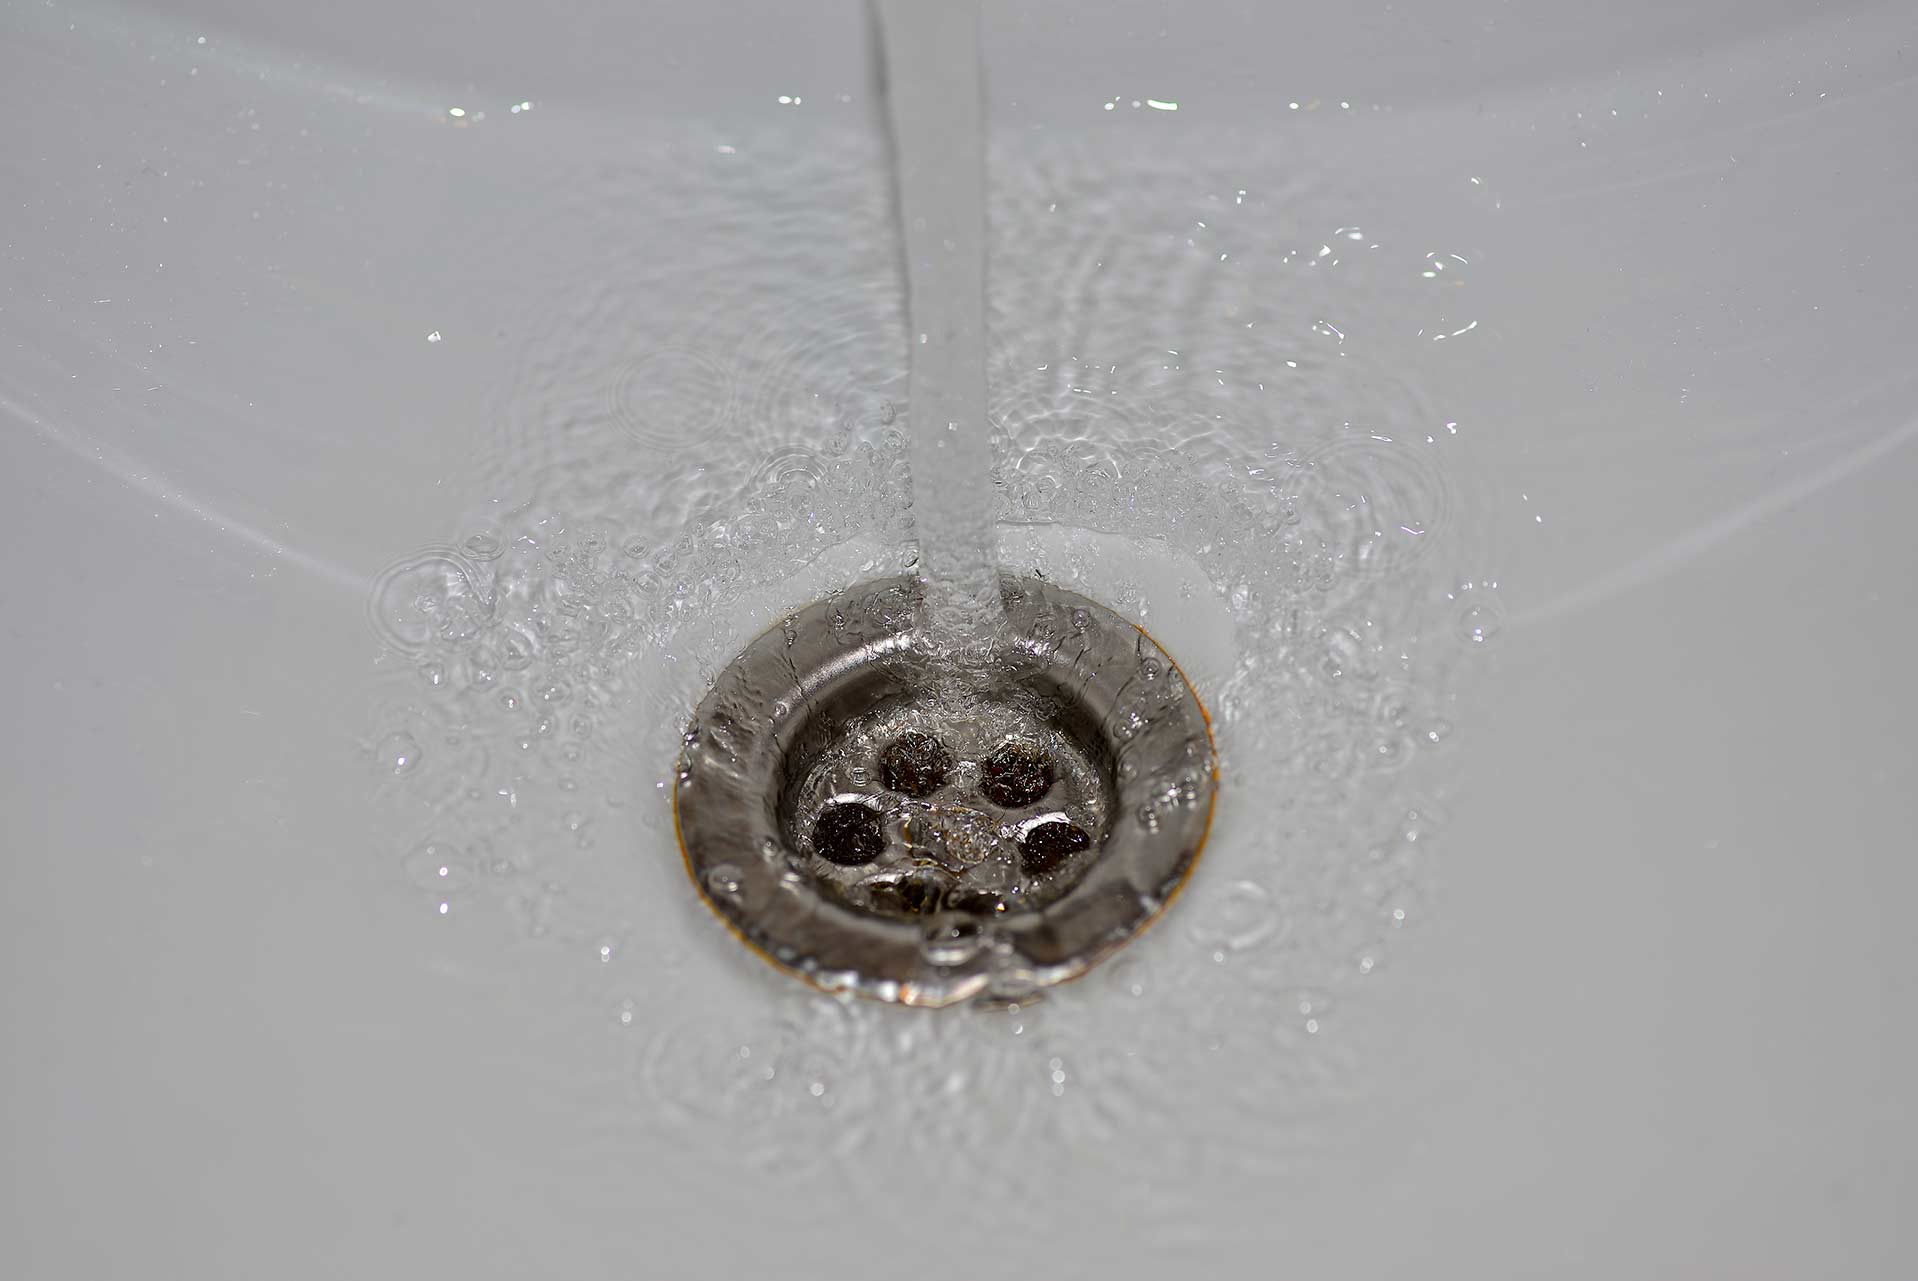 A2B Drains provides services to unblock blocked sinks and drains for properties in Aylesbury Vale.